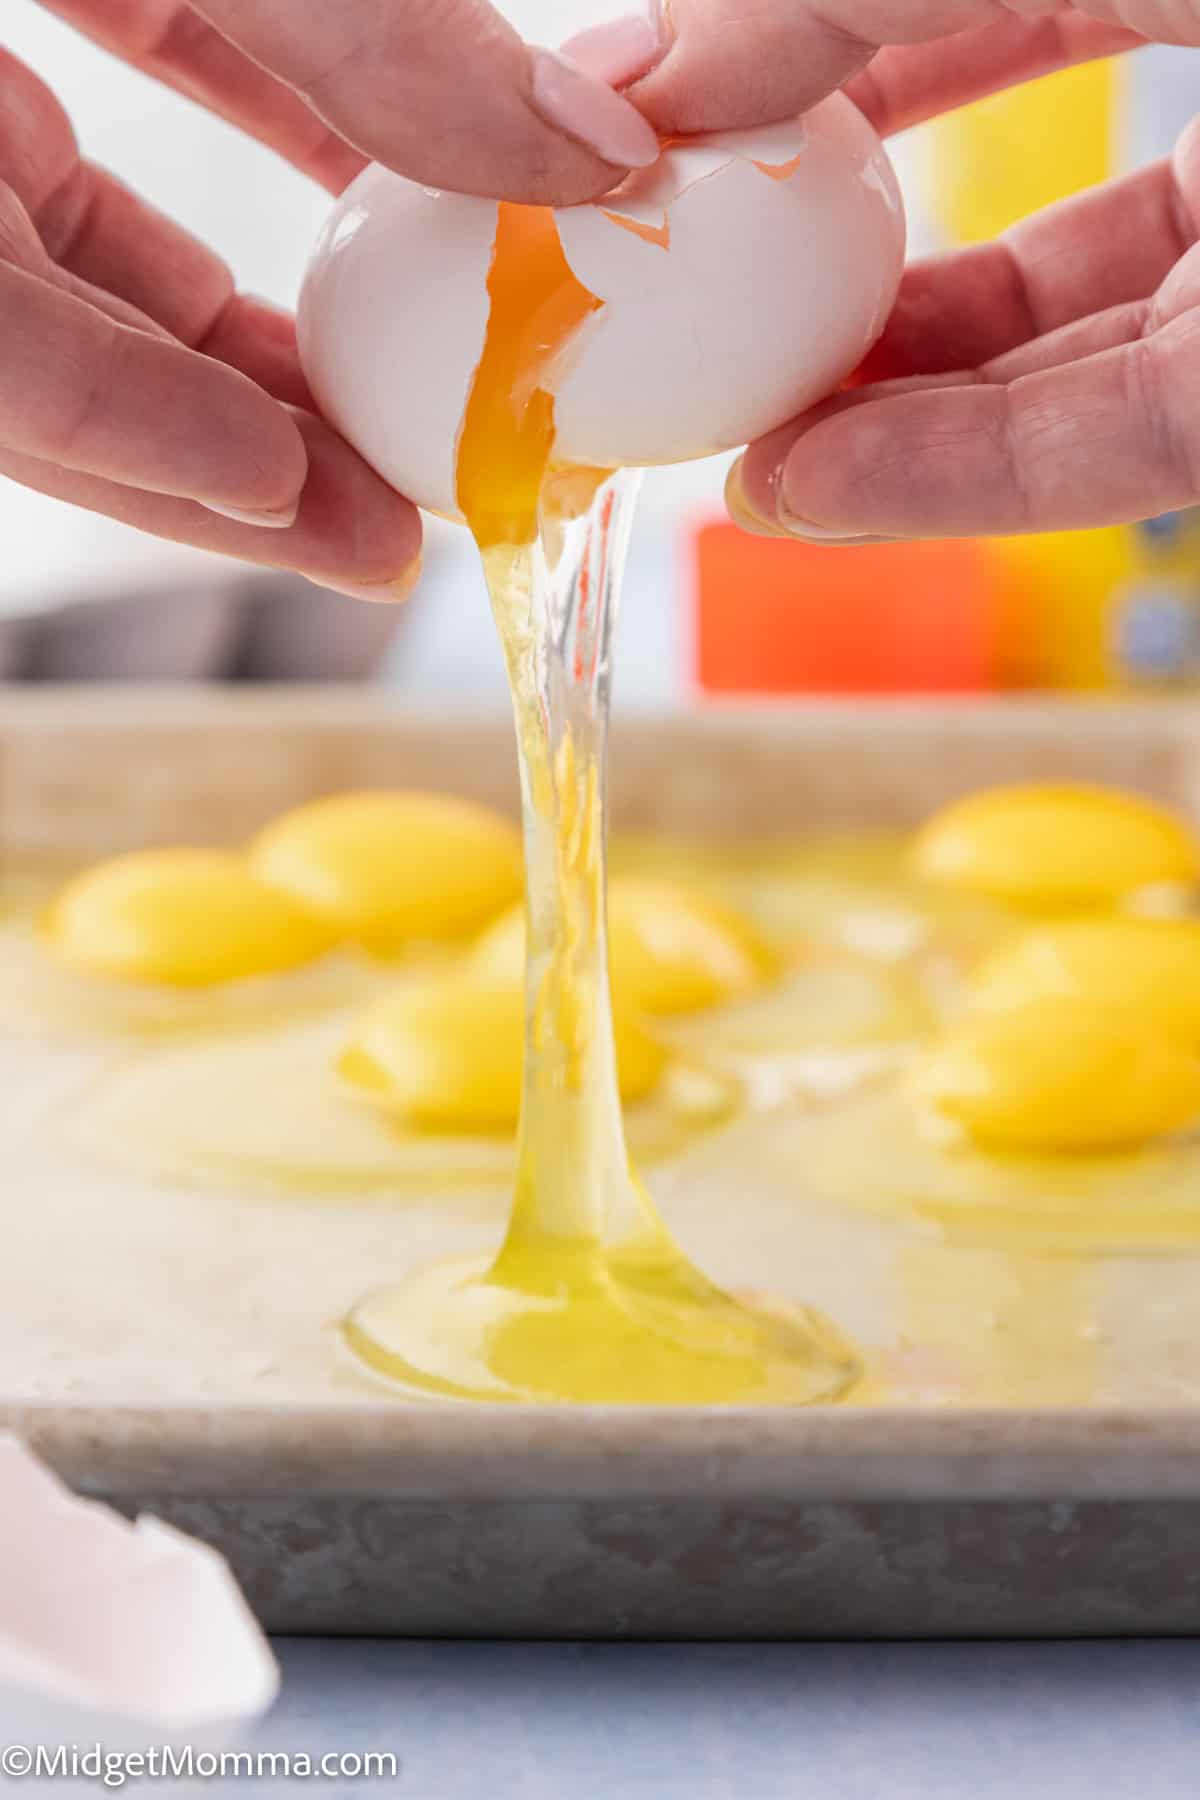 Hands cracking an egg, with the yolk and white flowing into a pan. Multiple cracked eggs already present in the background.